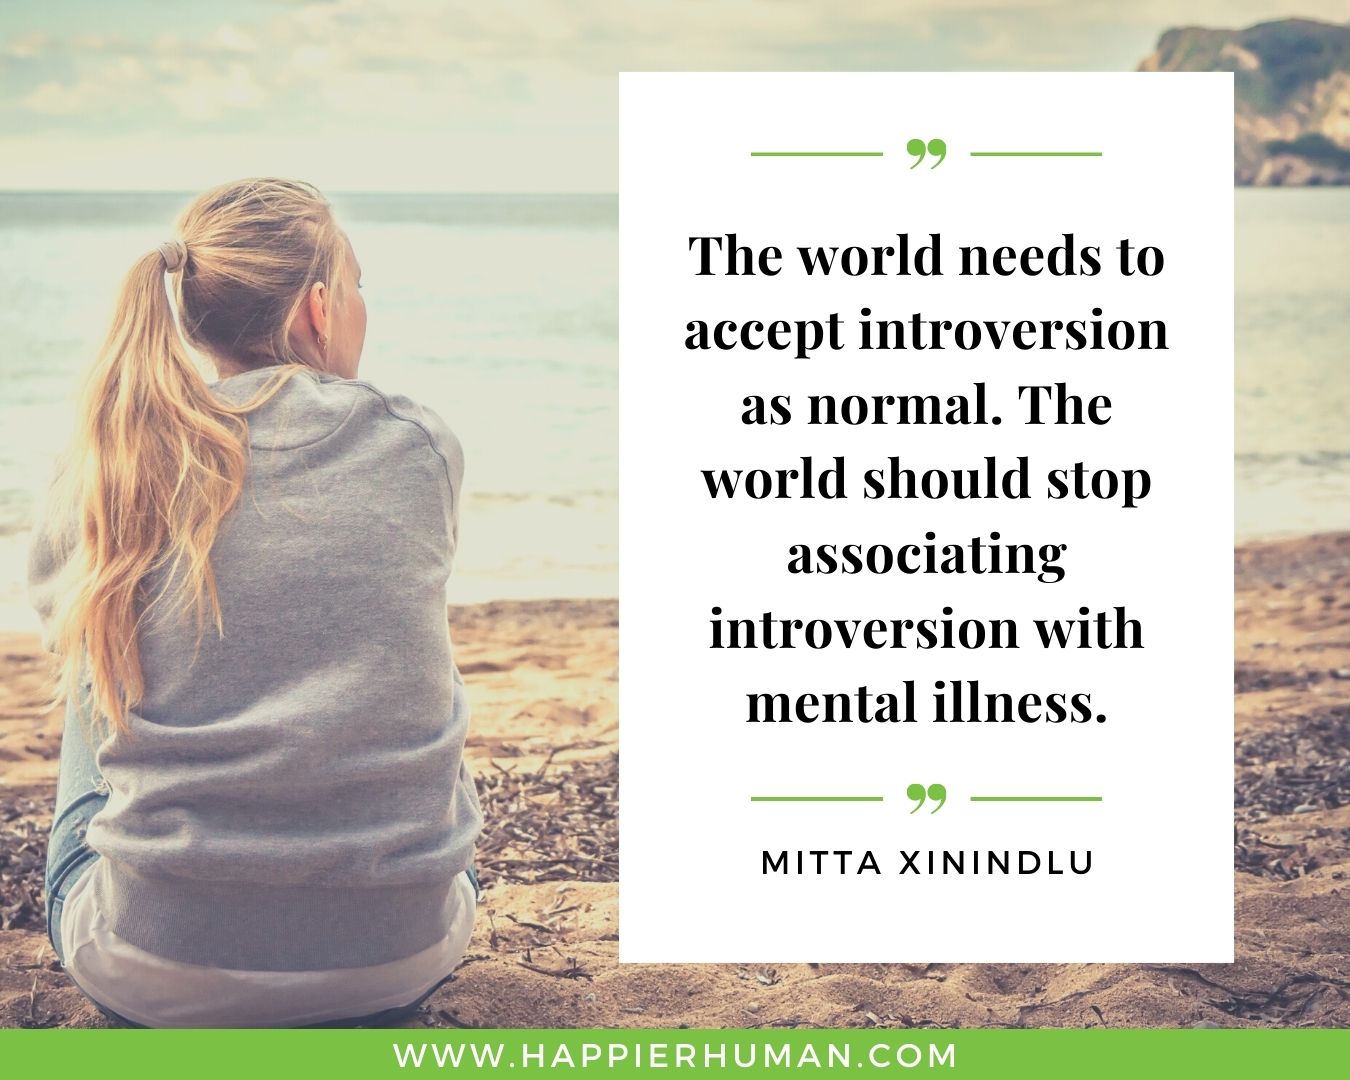 Introvert Quotes - “The world needs to accept introversion as normal. The world should stop associating introversion with mental illness.” – Mitta Xinindlu